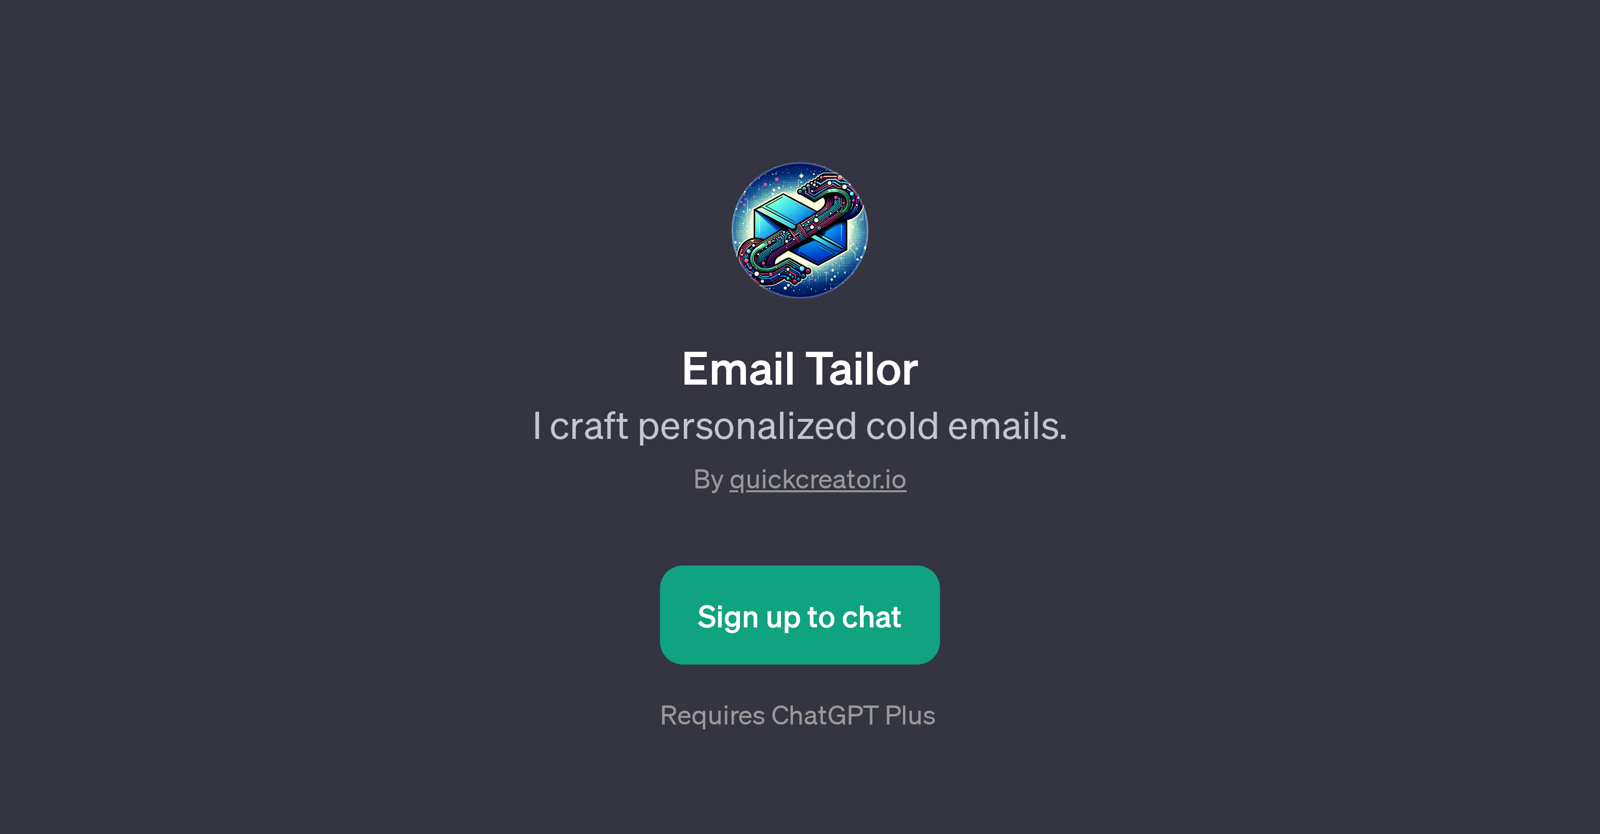 Email Tailor website